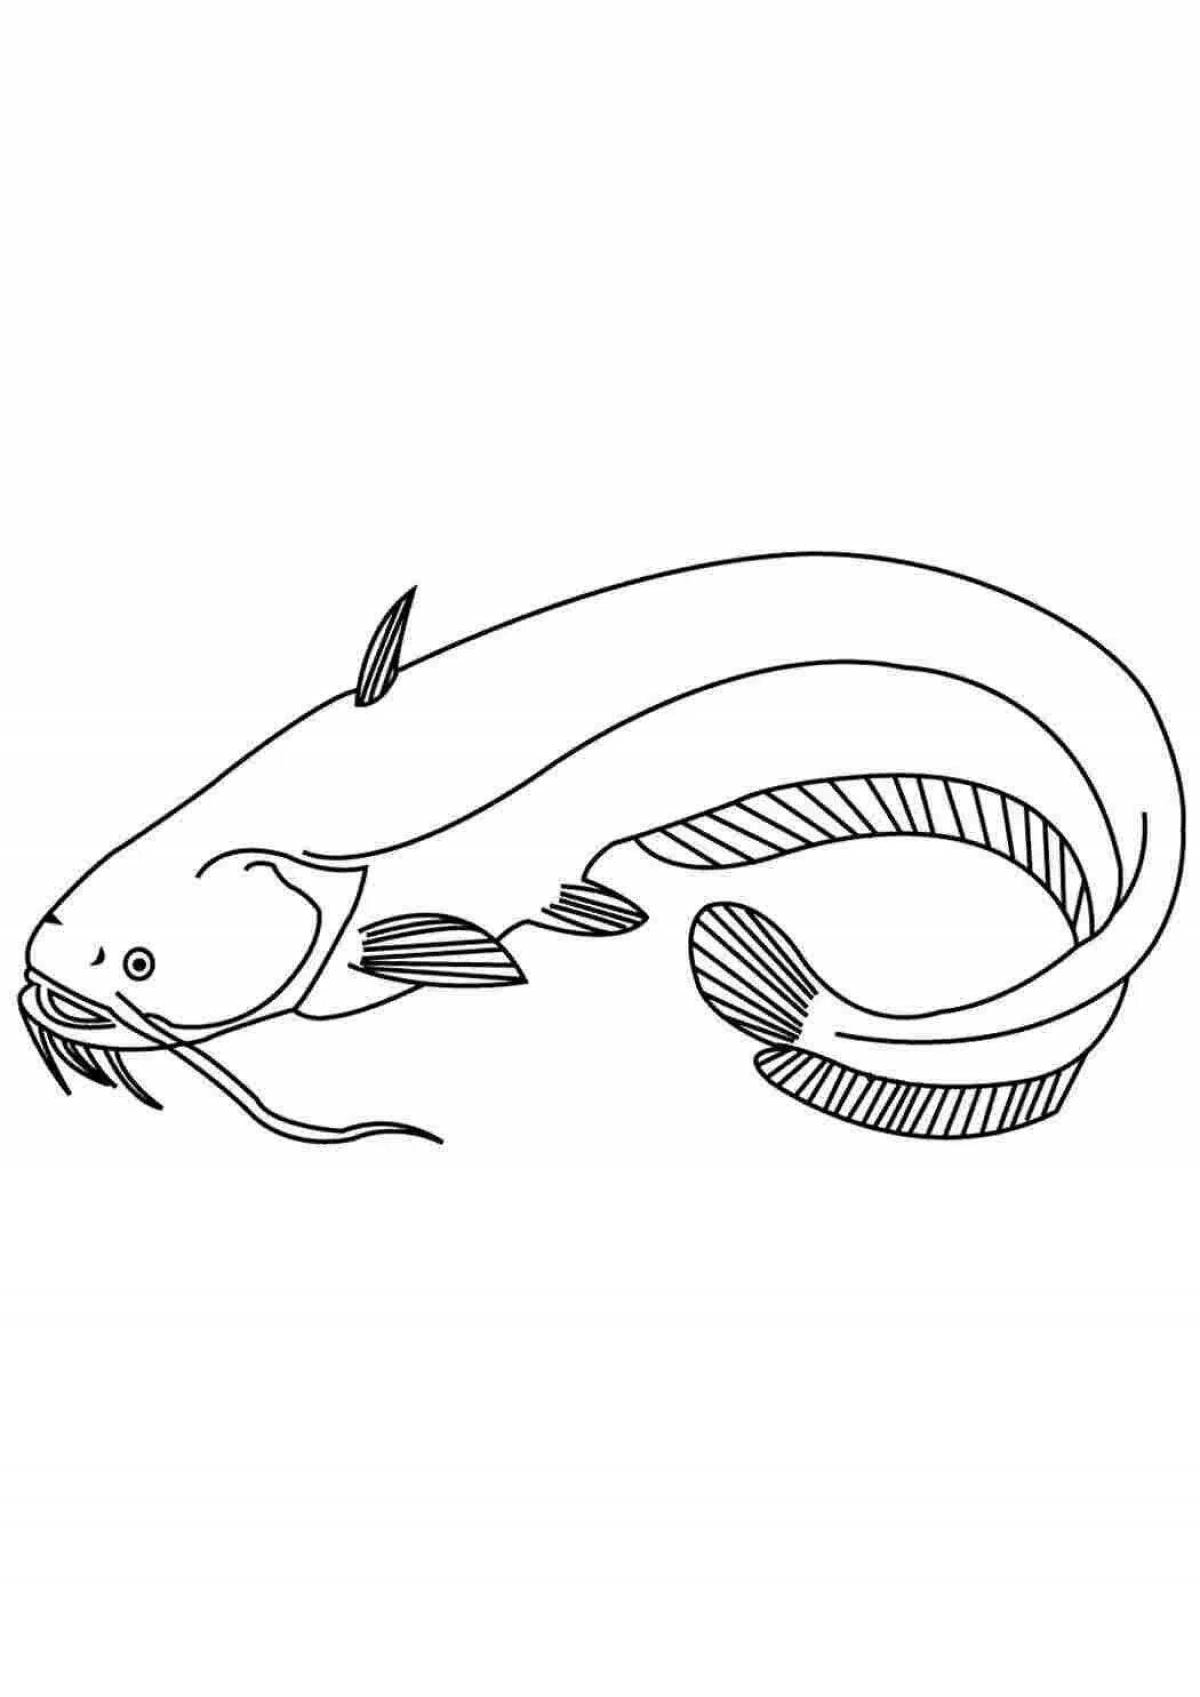 Coloring page adorable catfish